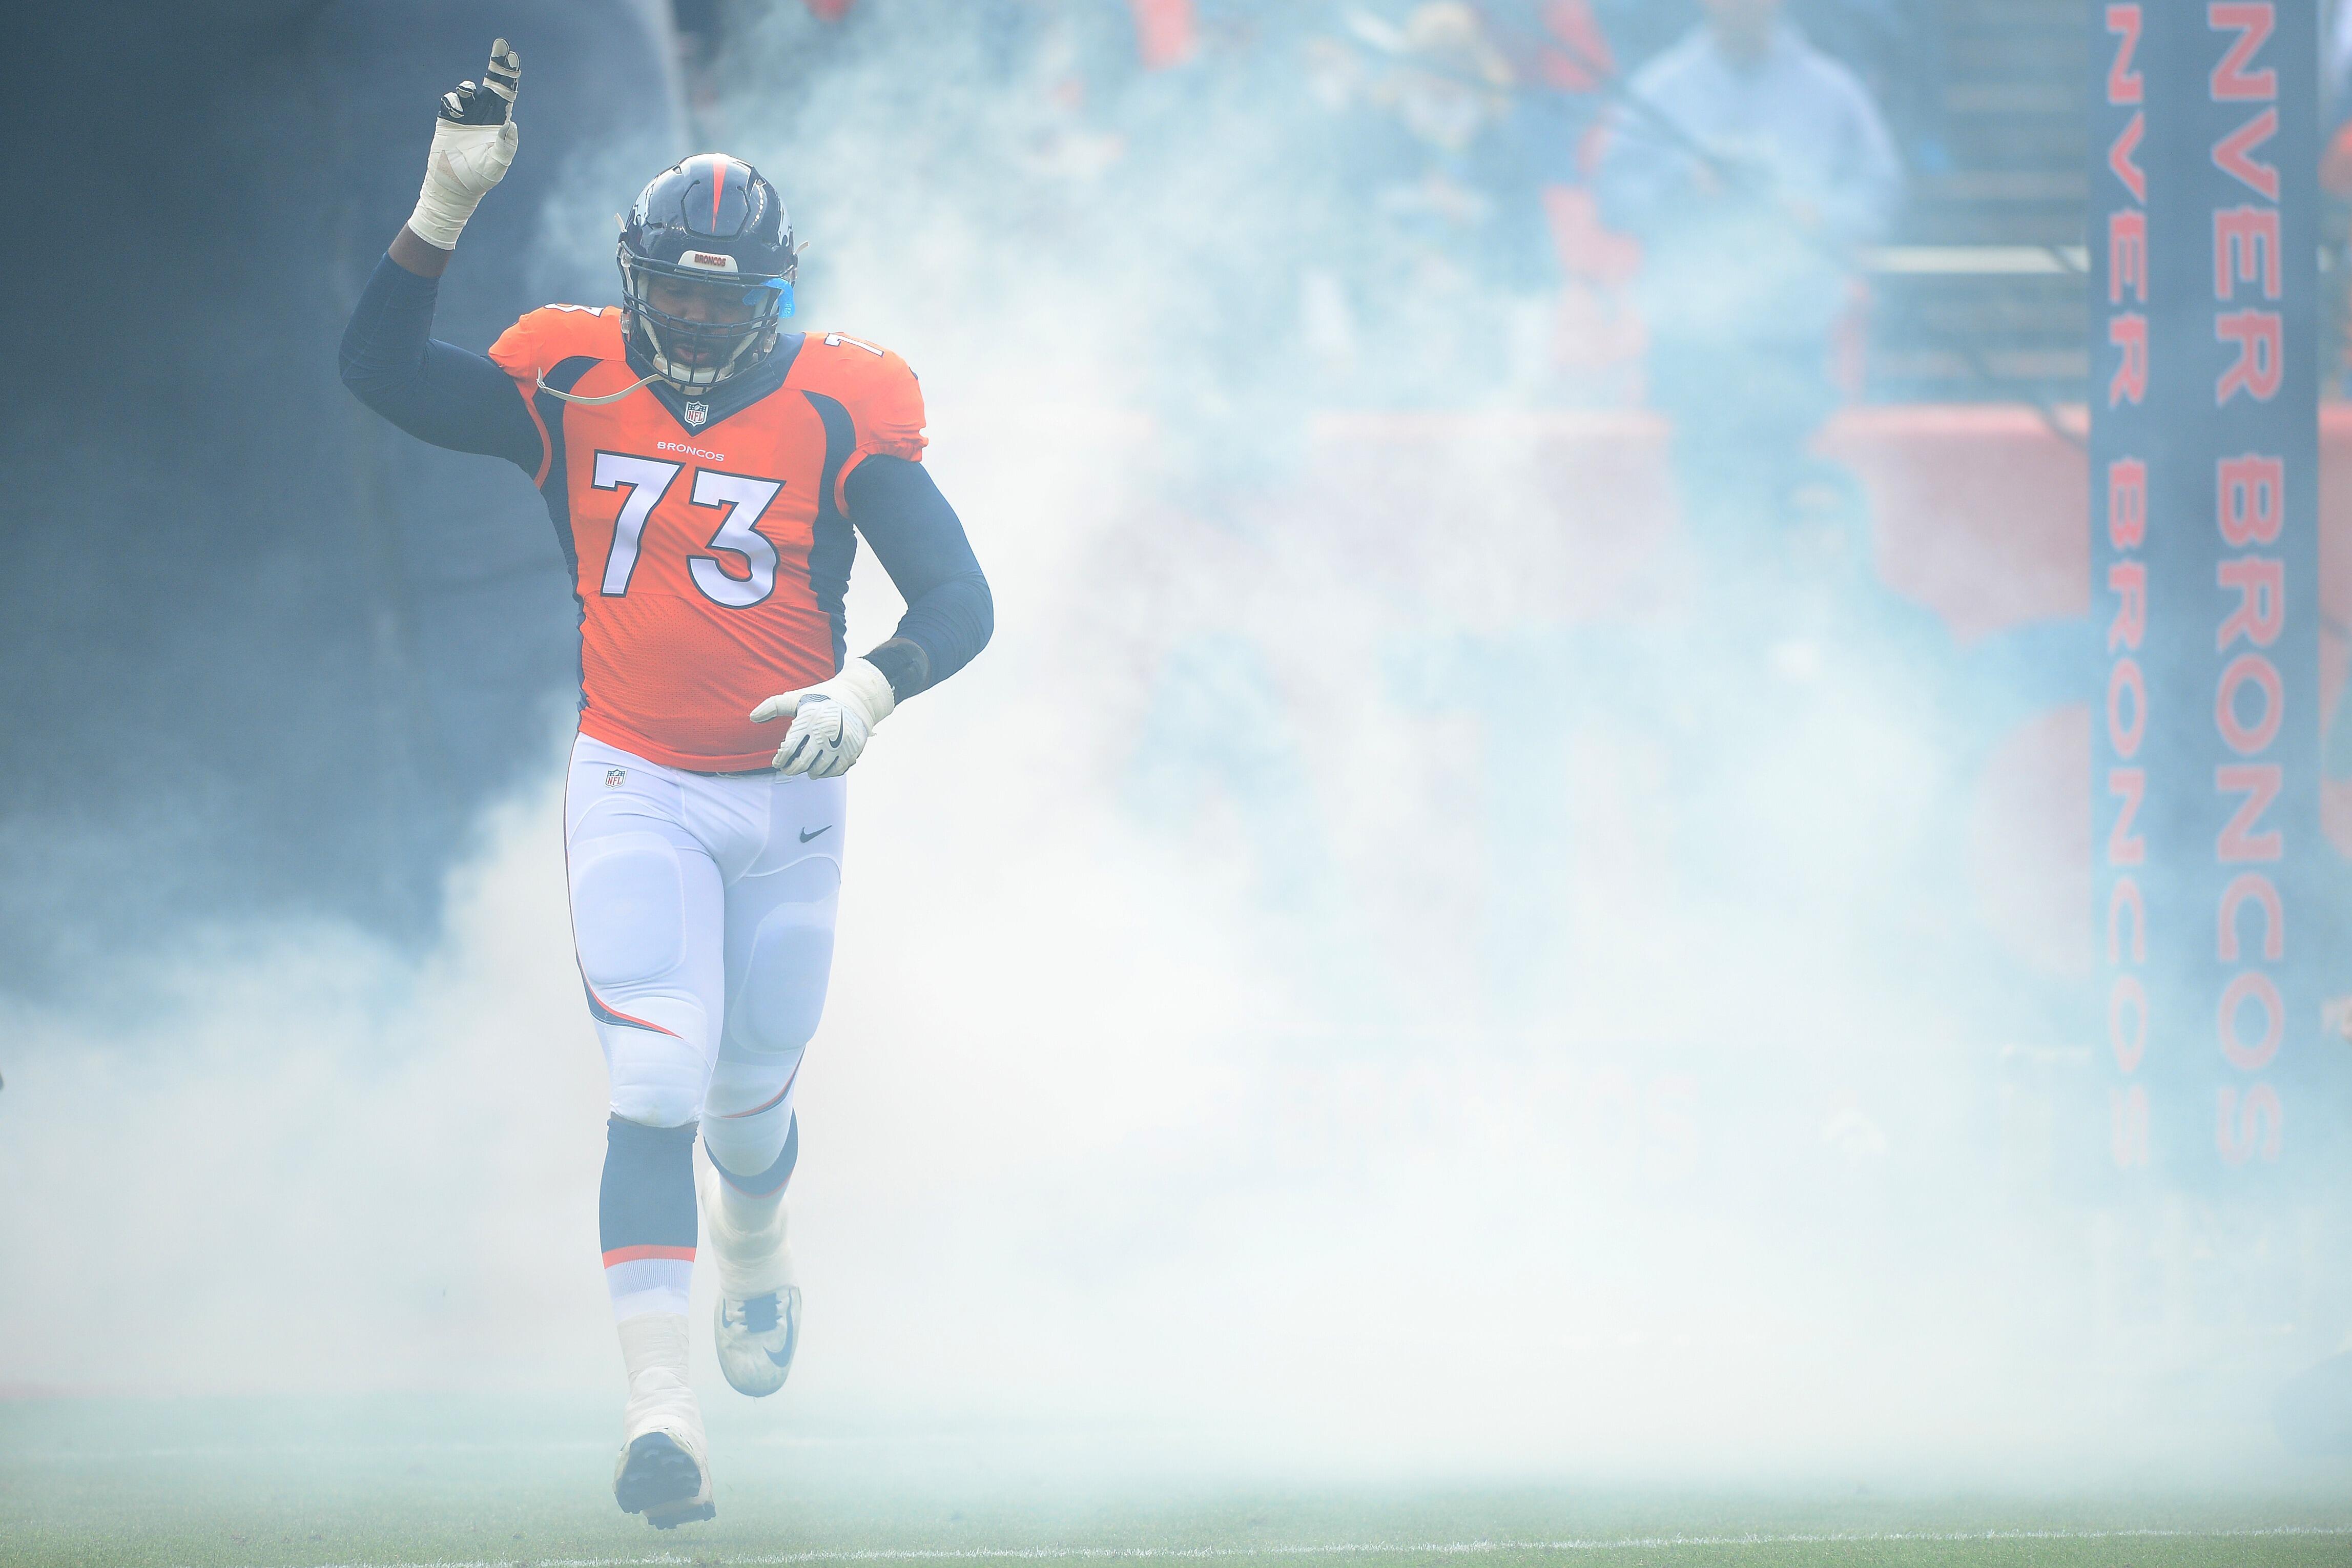 DENVER, CO - JANUARY 1:  Offensive tackle Russell Okung #73 of the Denver Broncos is introduced to the game against the Oakland Raiders at Sports Authority Field at Mile High on January 1, 2017 in Denver, Colorado. (Photo by Dustin Bradford/Getty Images)